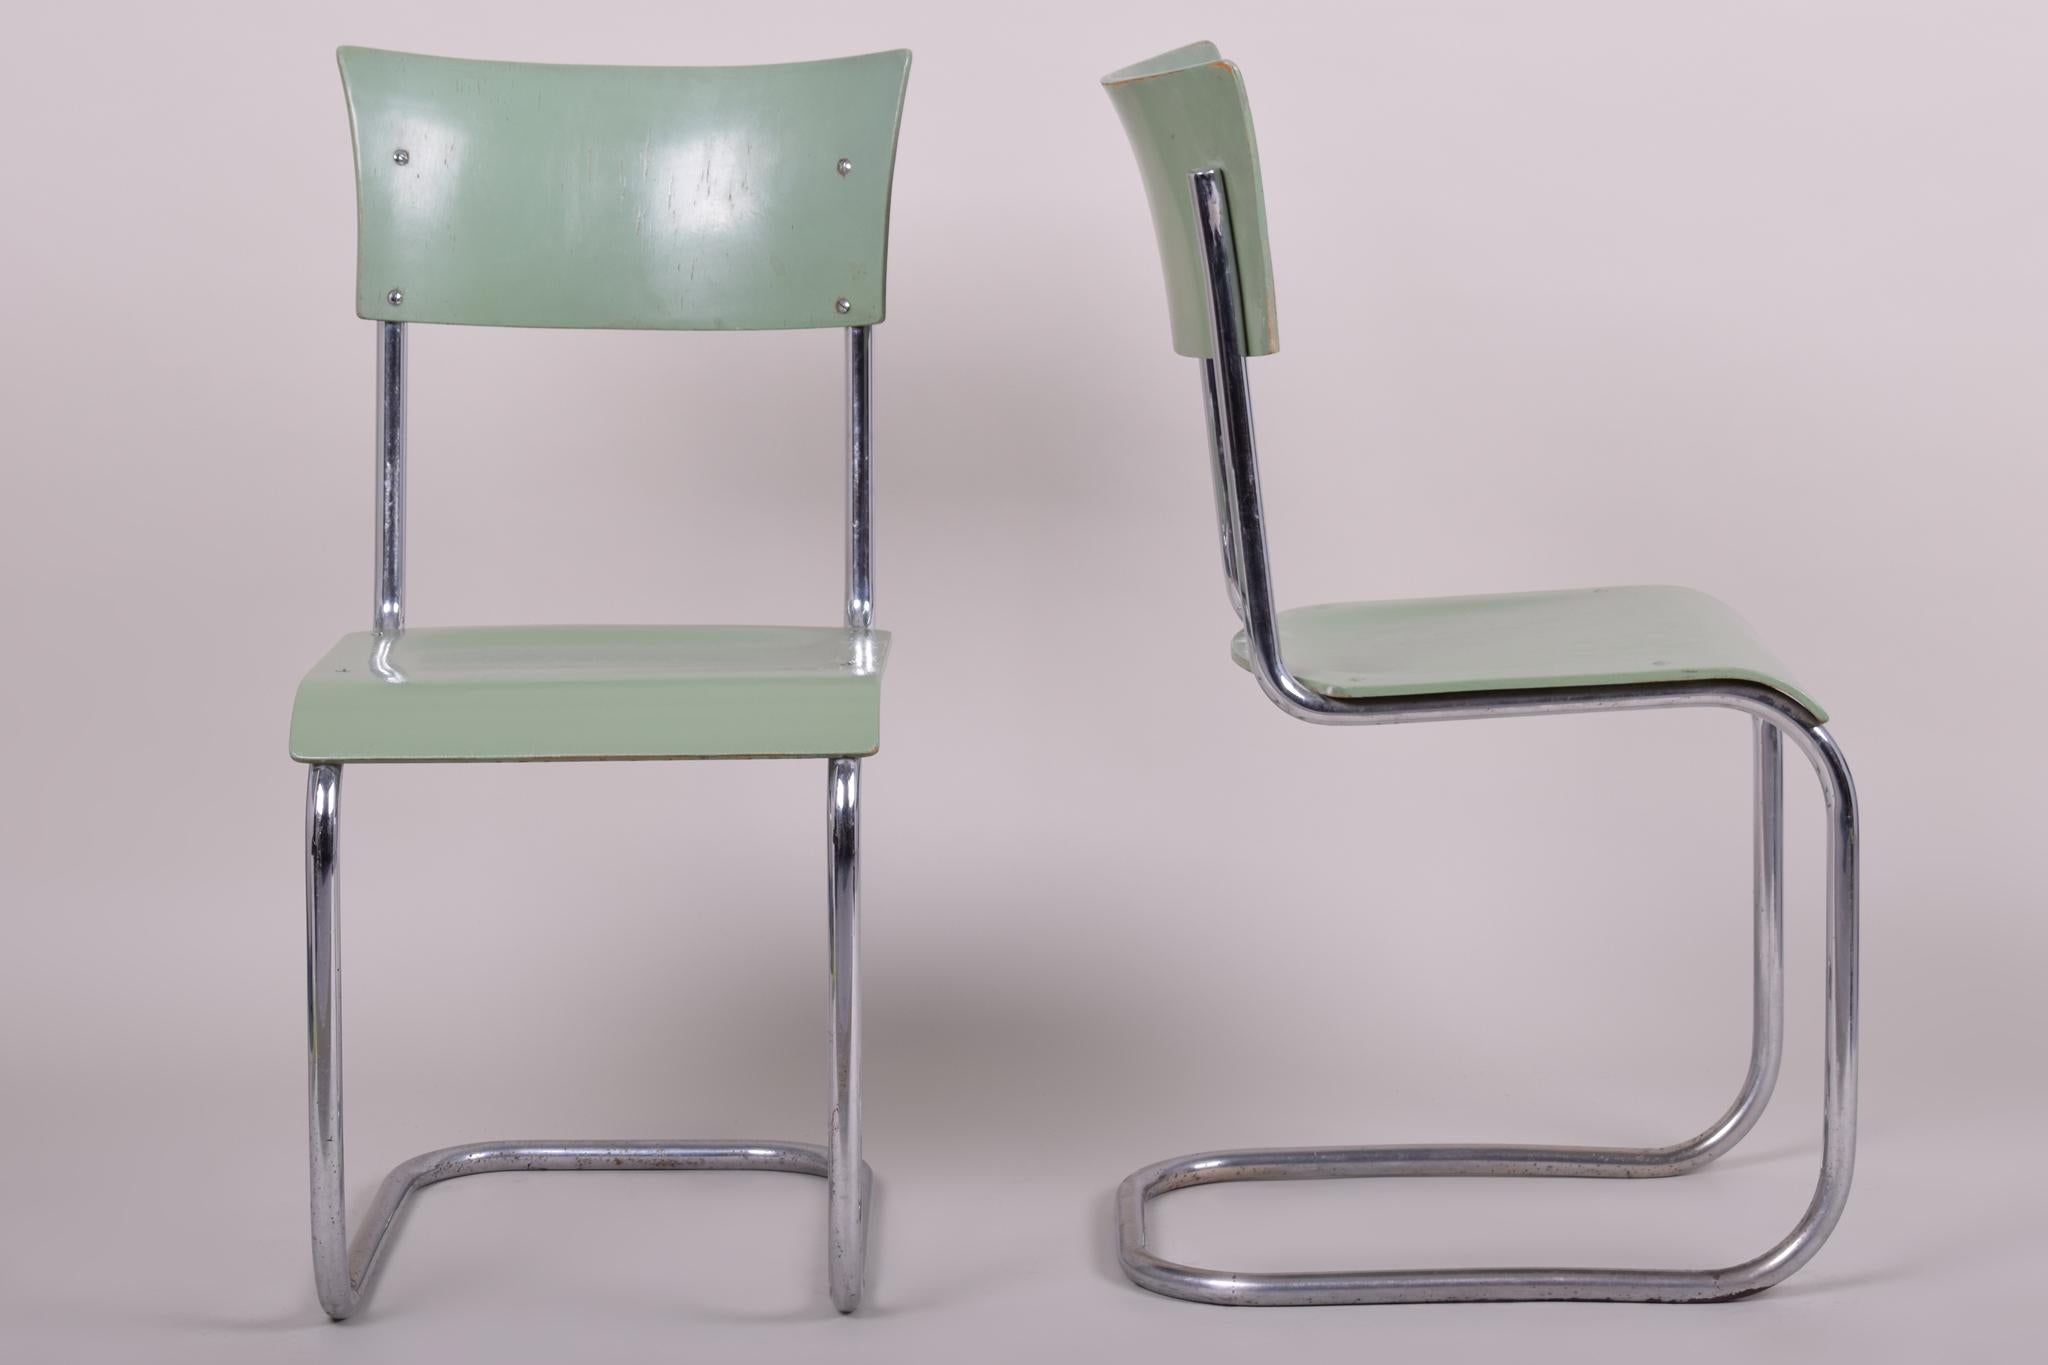 This original Bauhaus chairs manufactured by Robert Slezák are a perfect representation of the simplistic elegance of the Bauhaus Era.

This perfect example of Czech Bauhaus style was produced by Robert Slezák which hails from a weighty midcentury